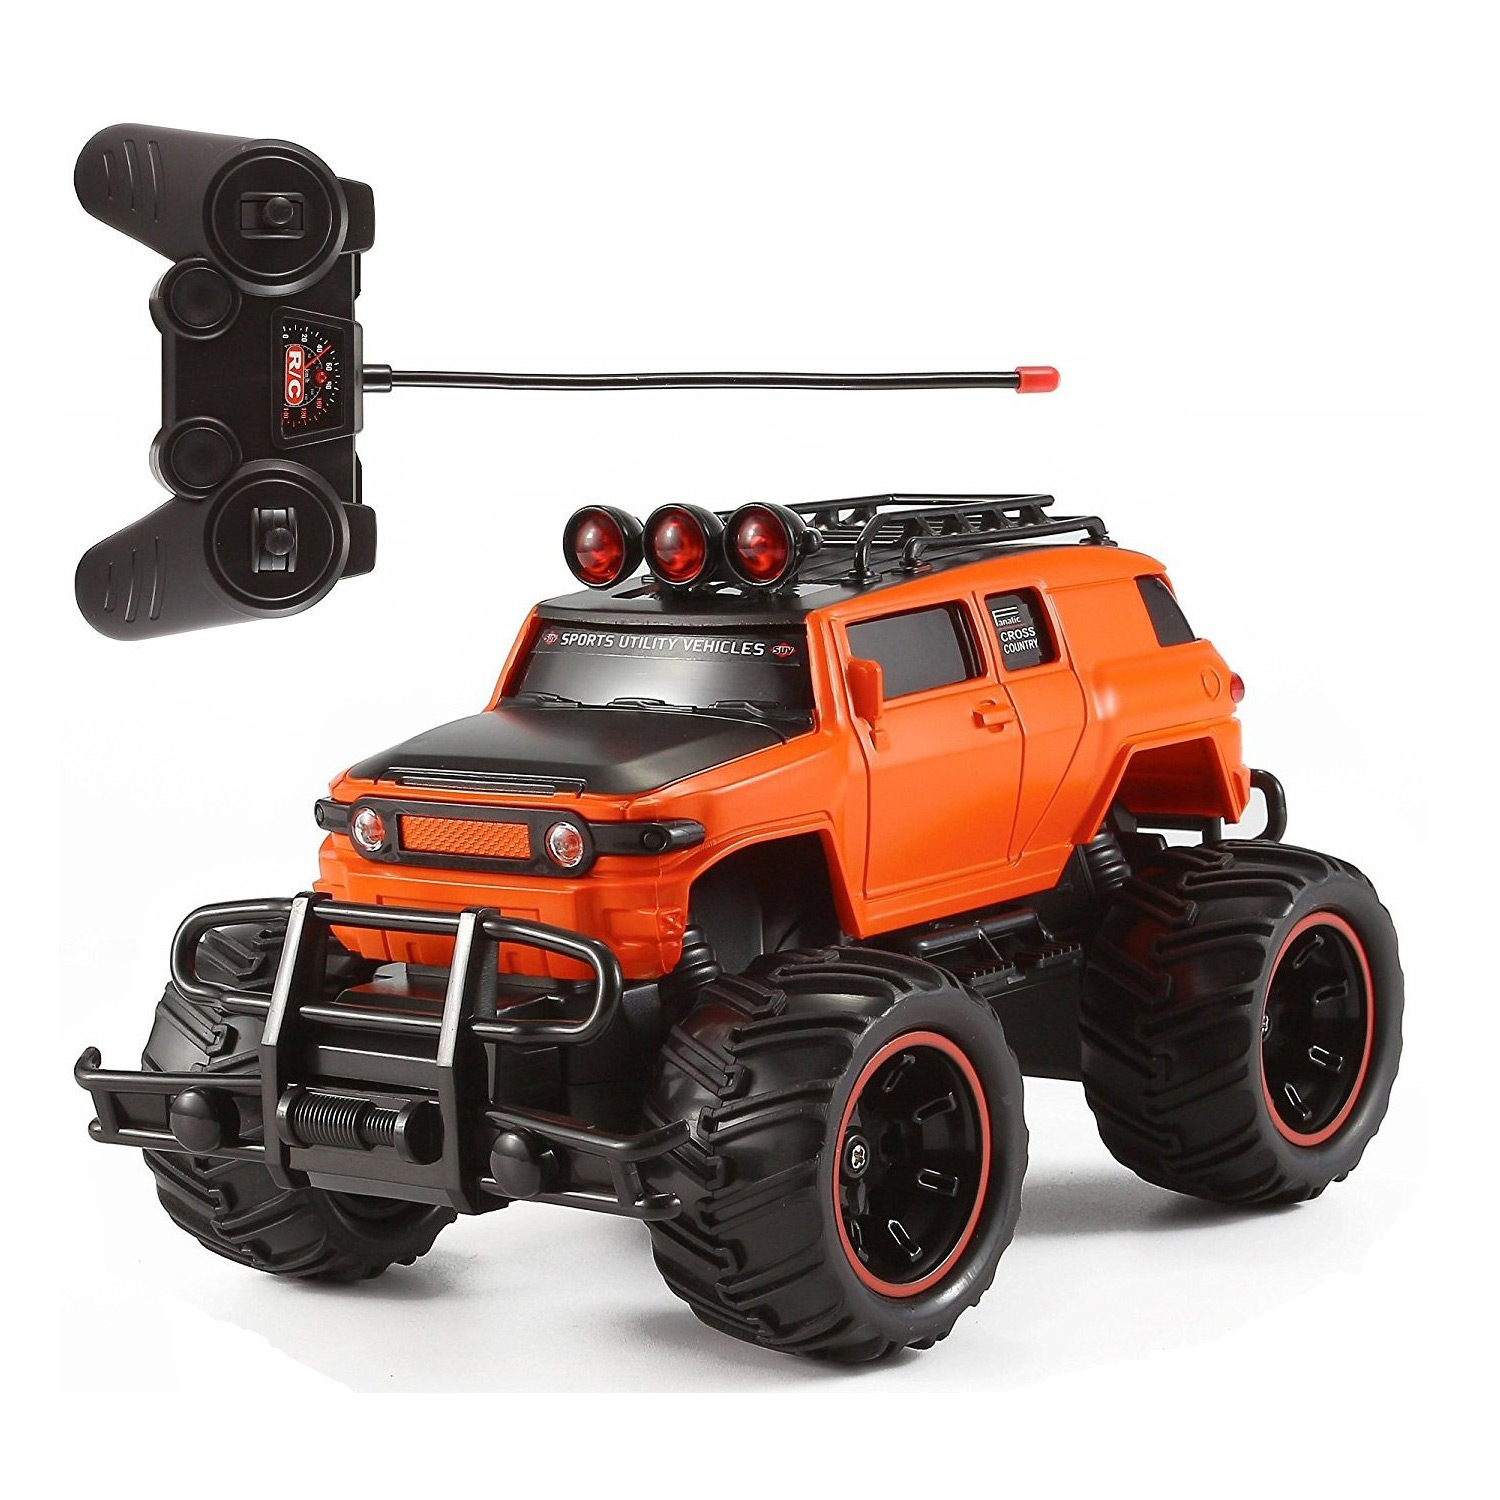 RC Monster Truck Toy Remote Control RTR Electric Vehicle Off Road High Speed Race Car 1:20 Scale Radio Controlled Orange Color